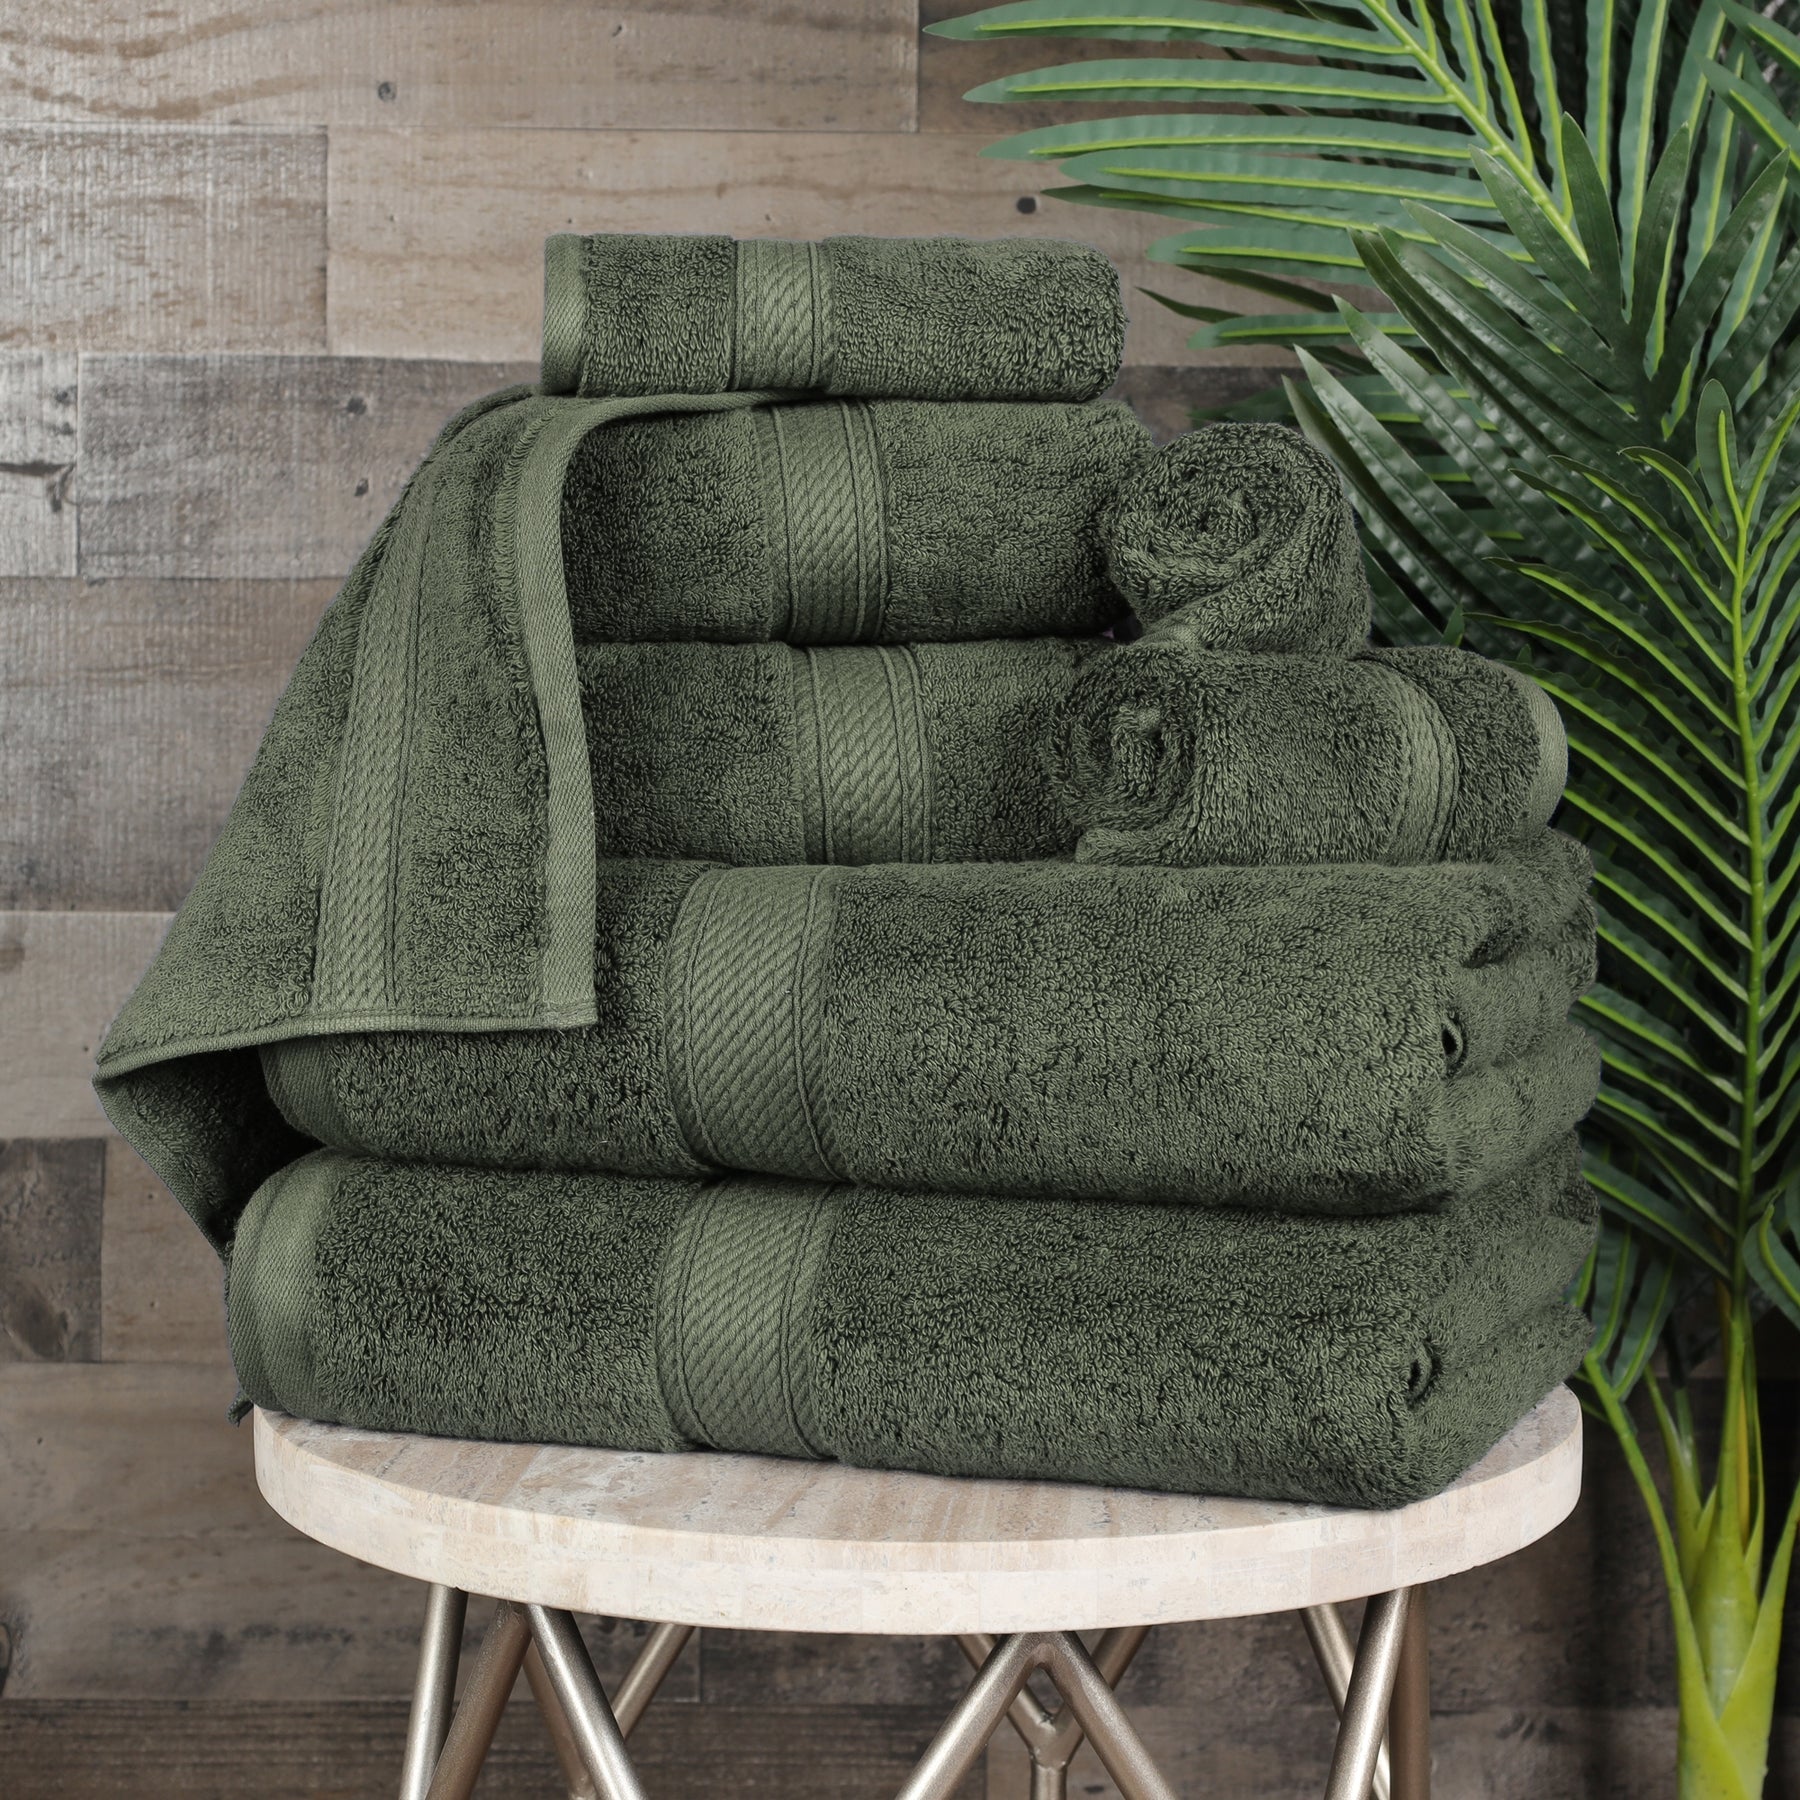 Superior Egyptian Cotton Pile Absorbent 8 Piece Solid Towel Set